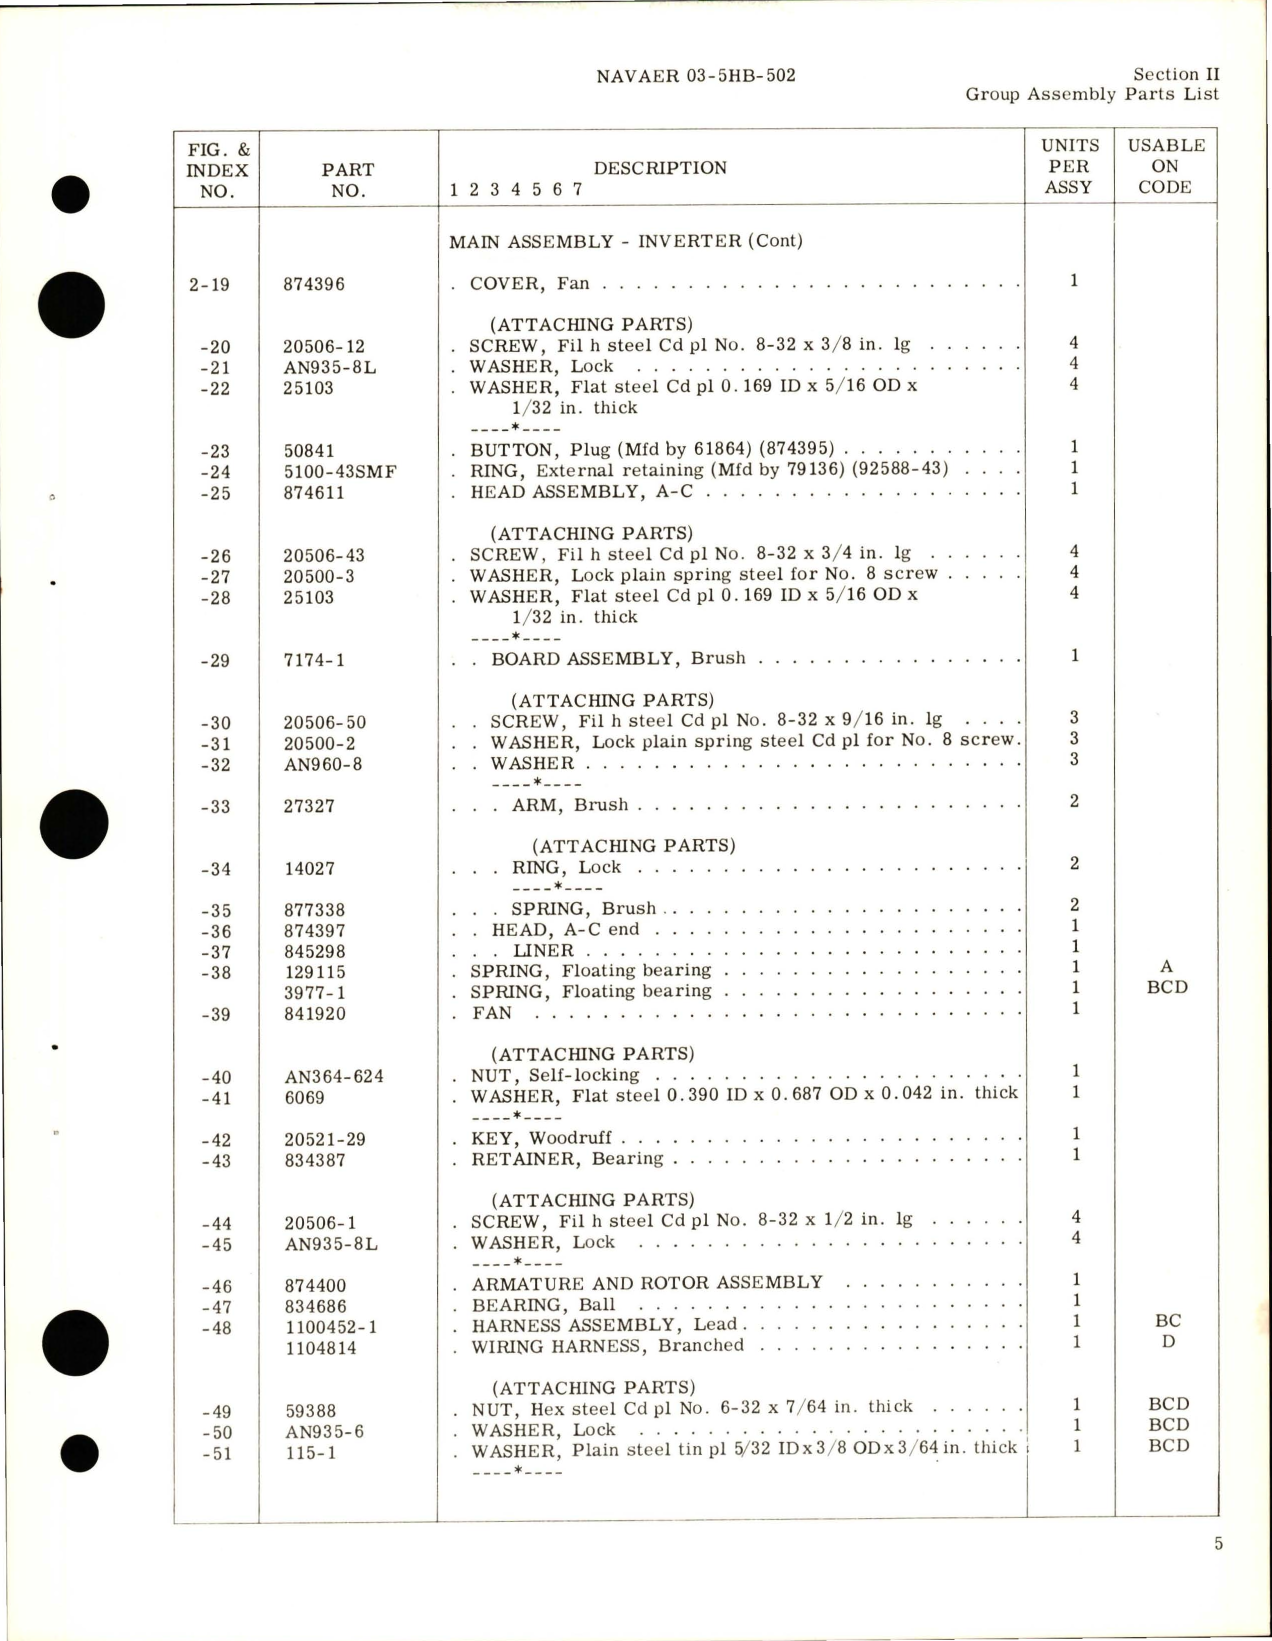 Sample page 9 from AirCorps Library document: Illustrated Parts Breakdown for Inverter Assembly - Types MG-54-C, MG-54-D, MG-54-E, and MG-54-F